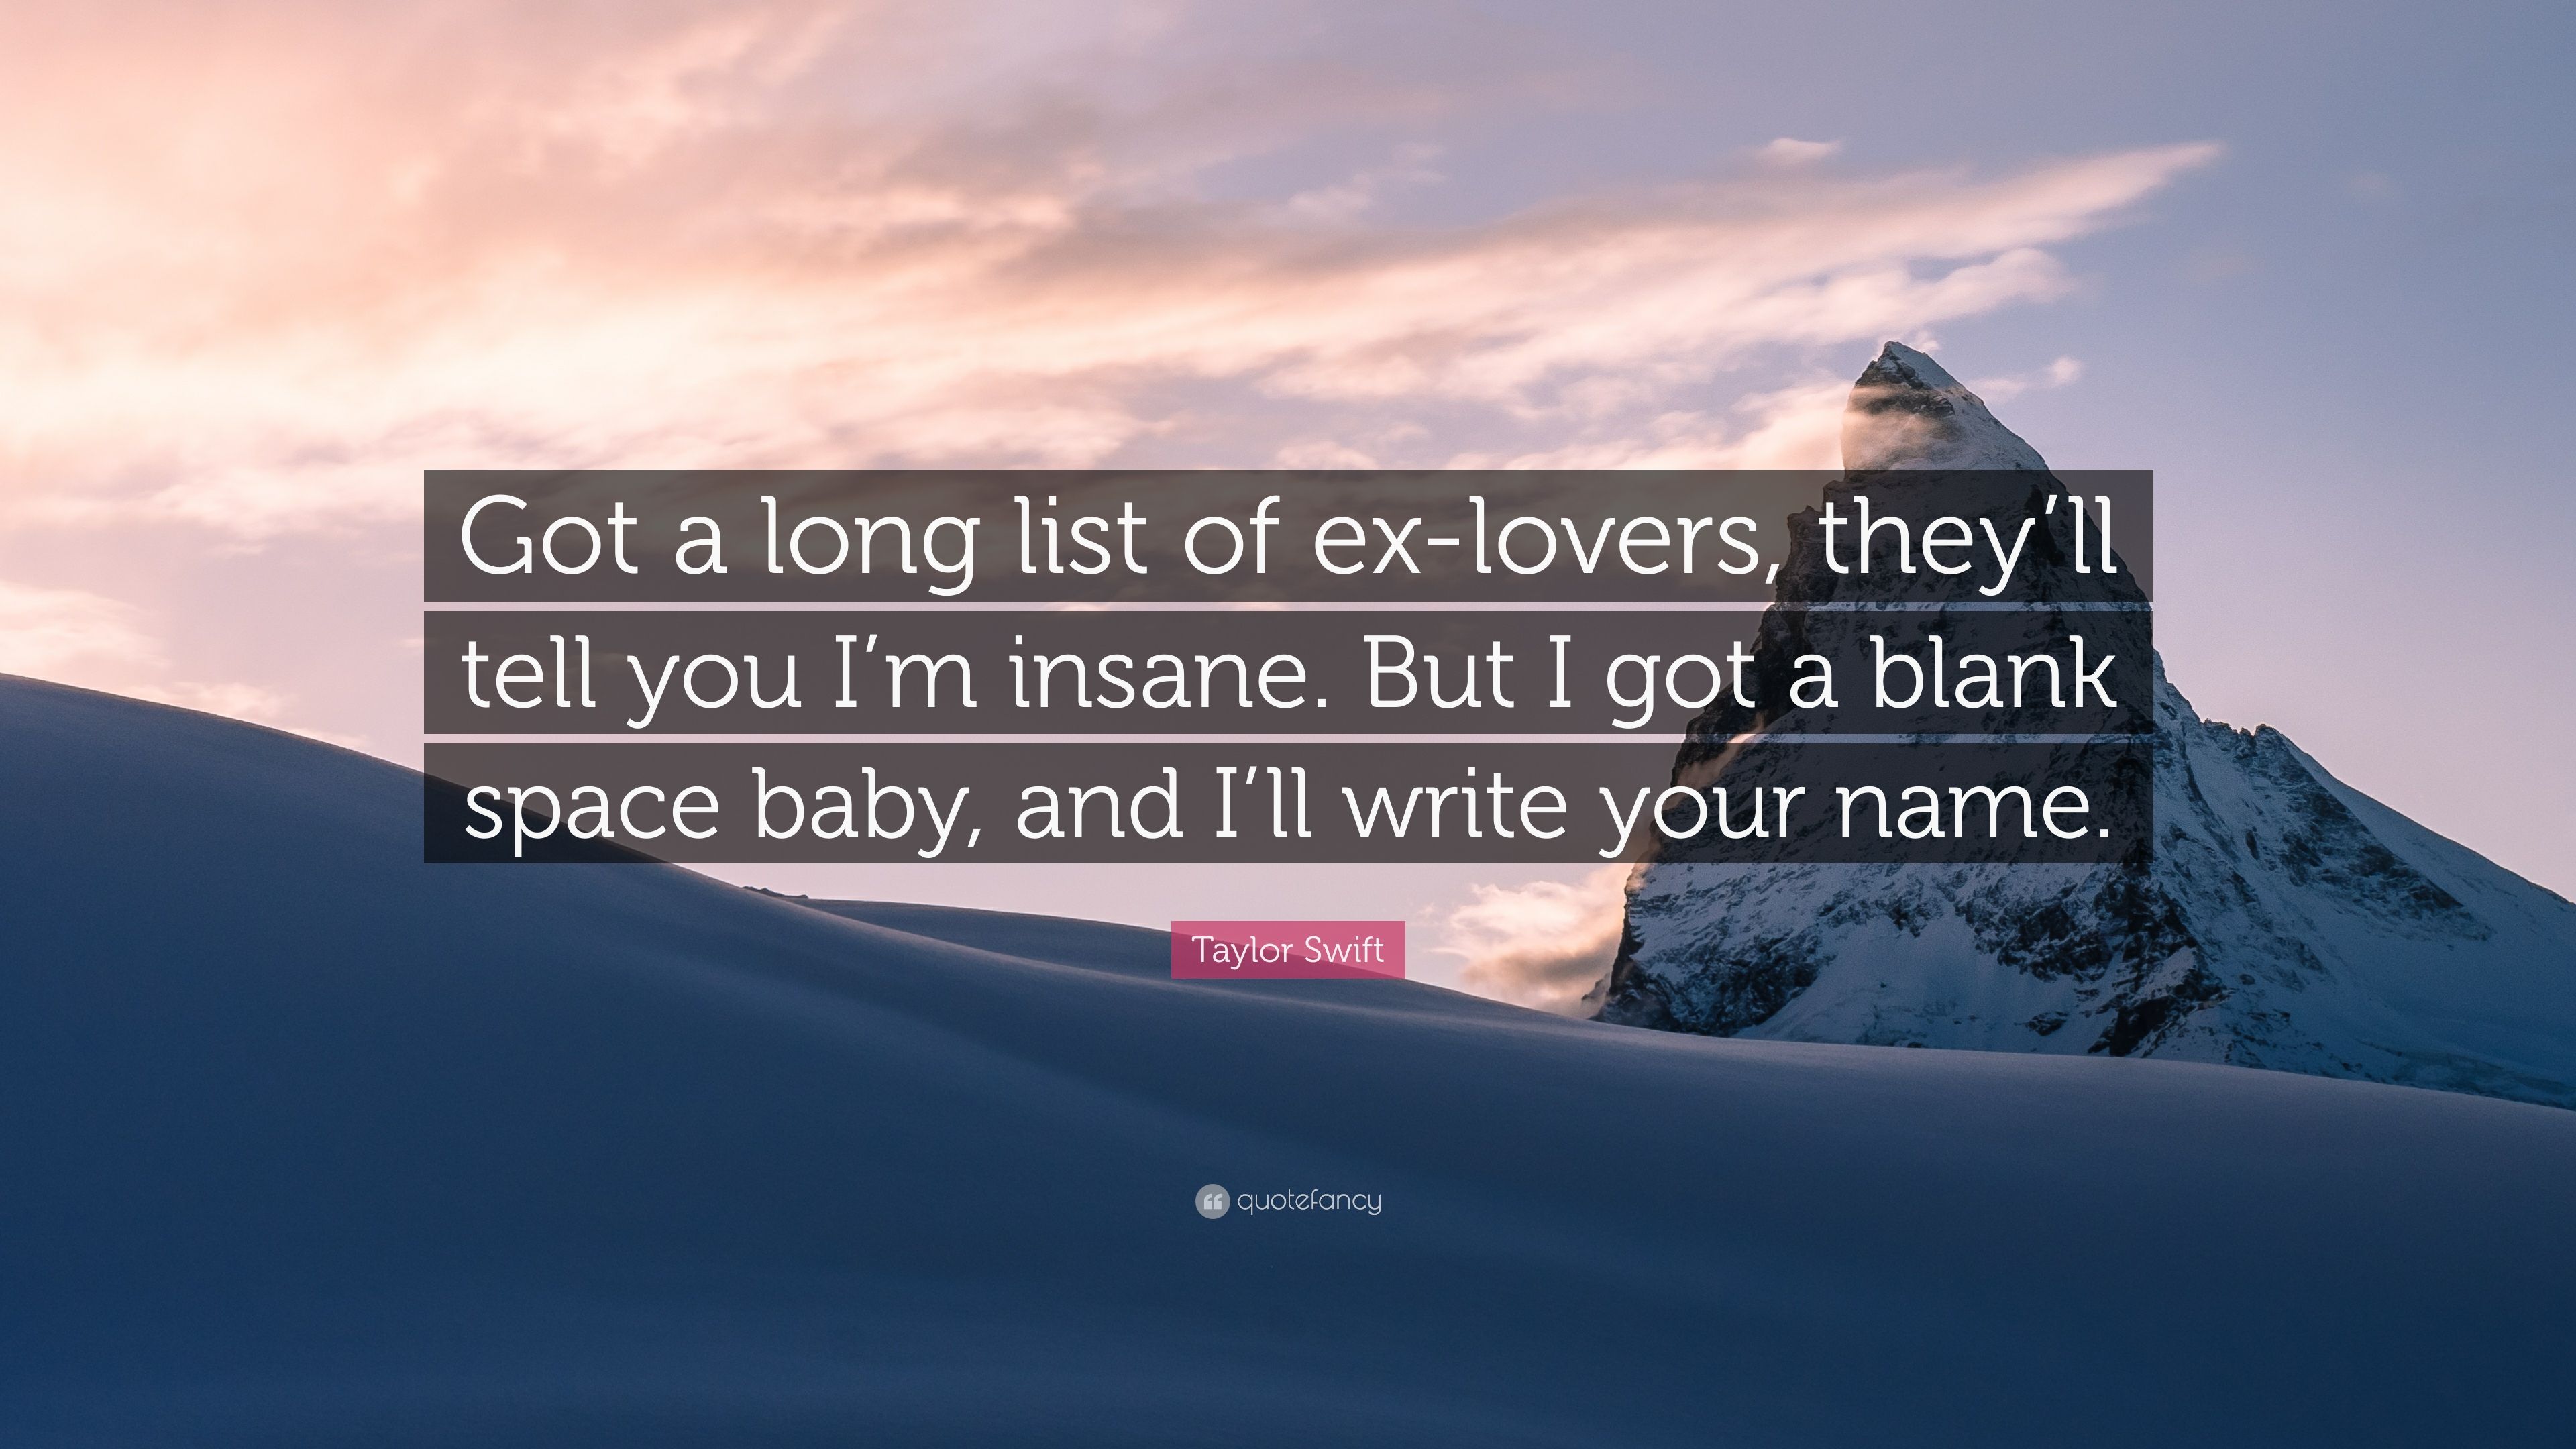 Taylor Swift Quote: “Got A Long List Of Ex Lovers, They'll Tell